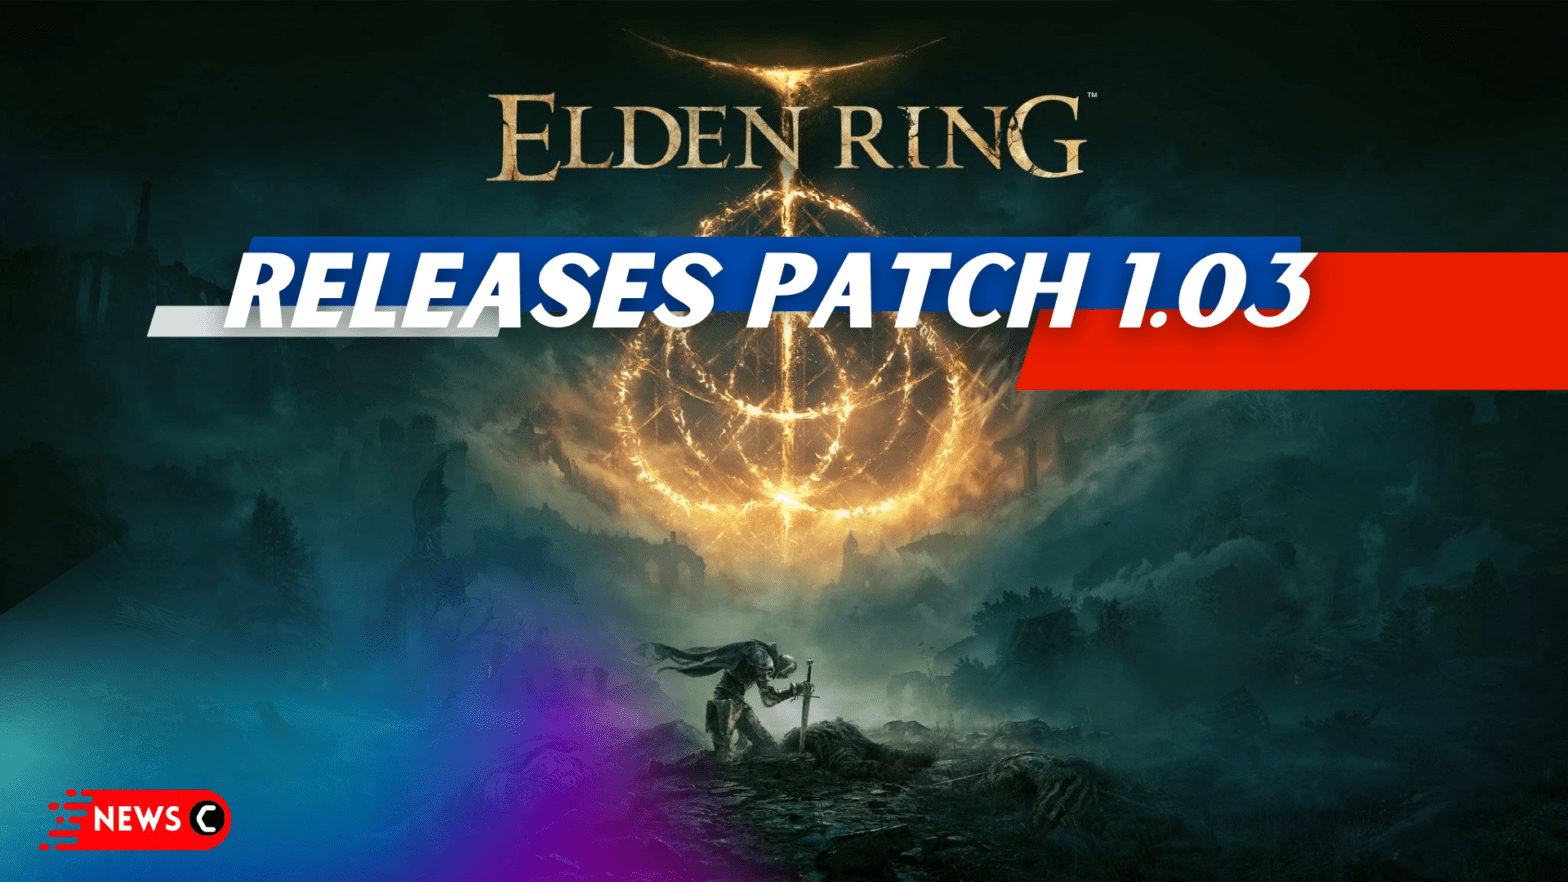 Elden Ring Releases Patch 1.03! Players Delighted